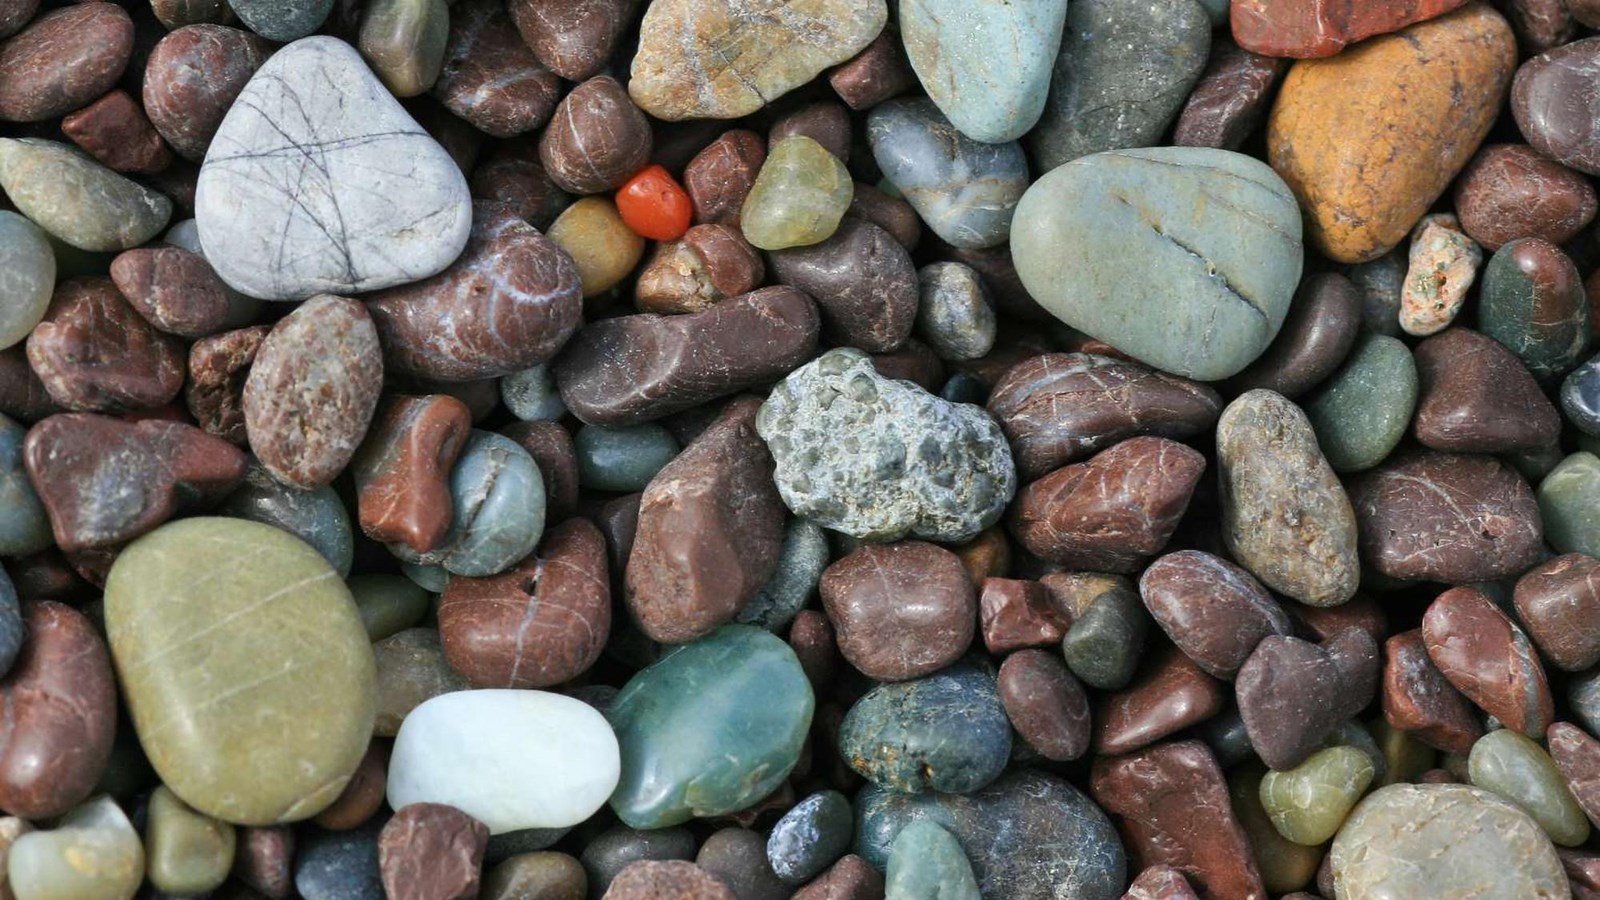  Colorful Franciscan Pebbles including orange carnelian, red and green chert, sandstone and basalt.